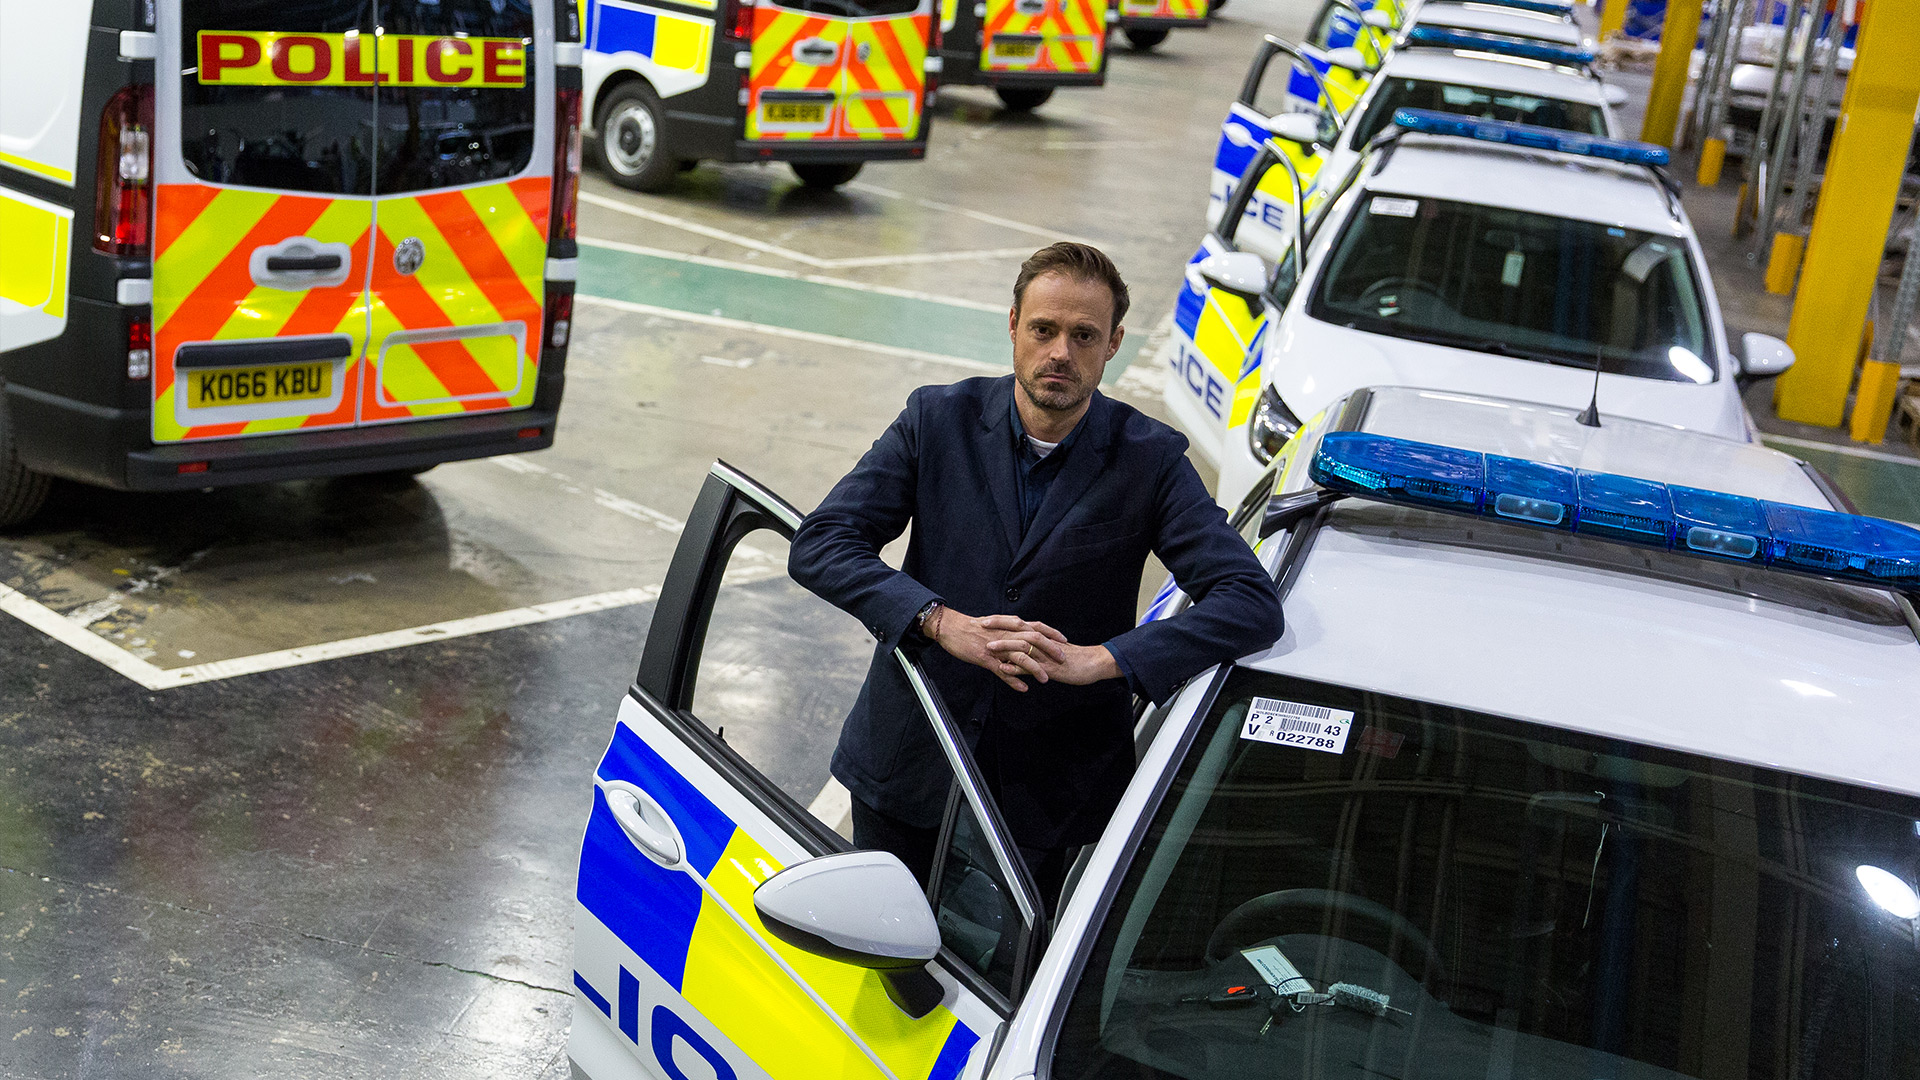 All New Traffic Cops Image